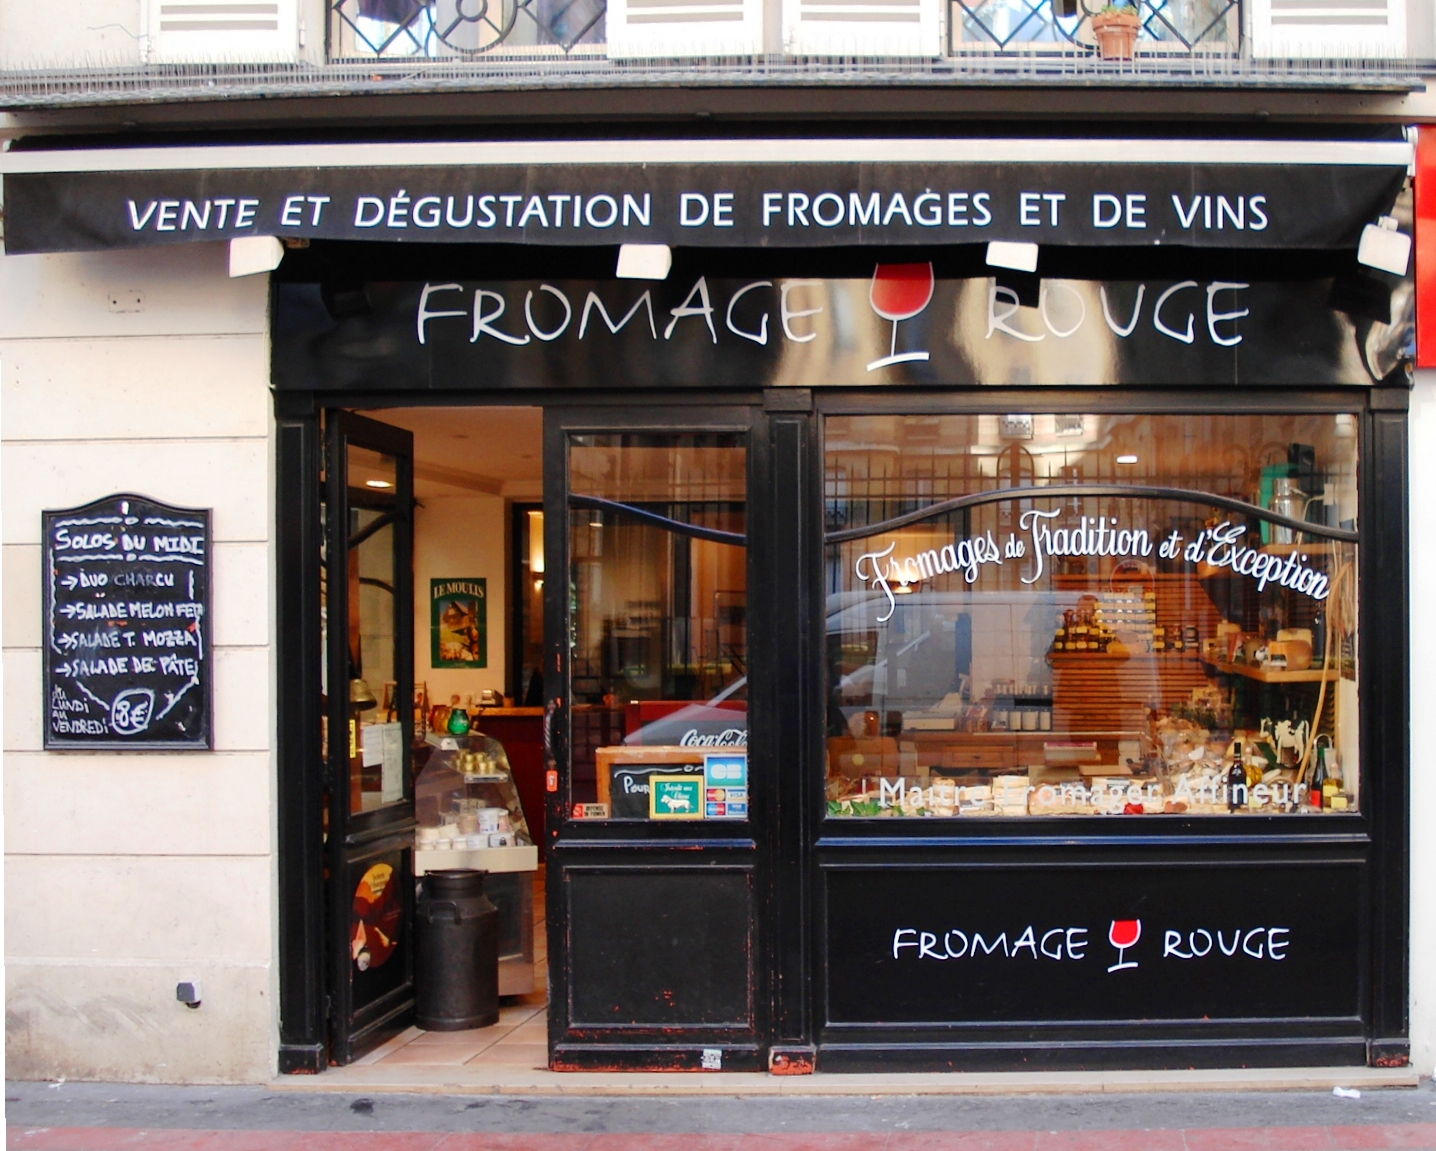 http://upload.wikimedia.org/wikipedia/commons/3/37/Fromagerie.jpg